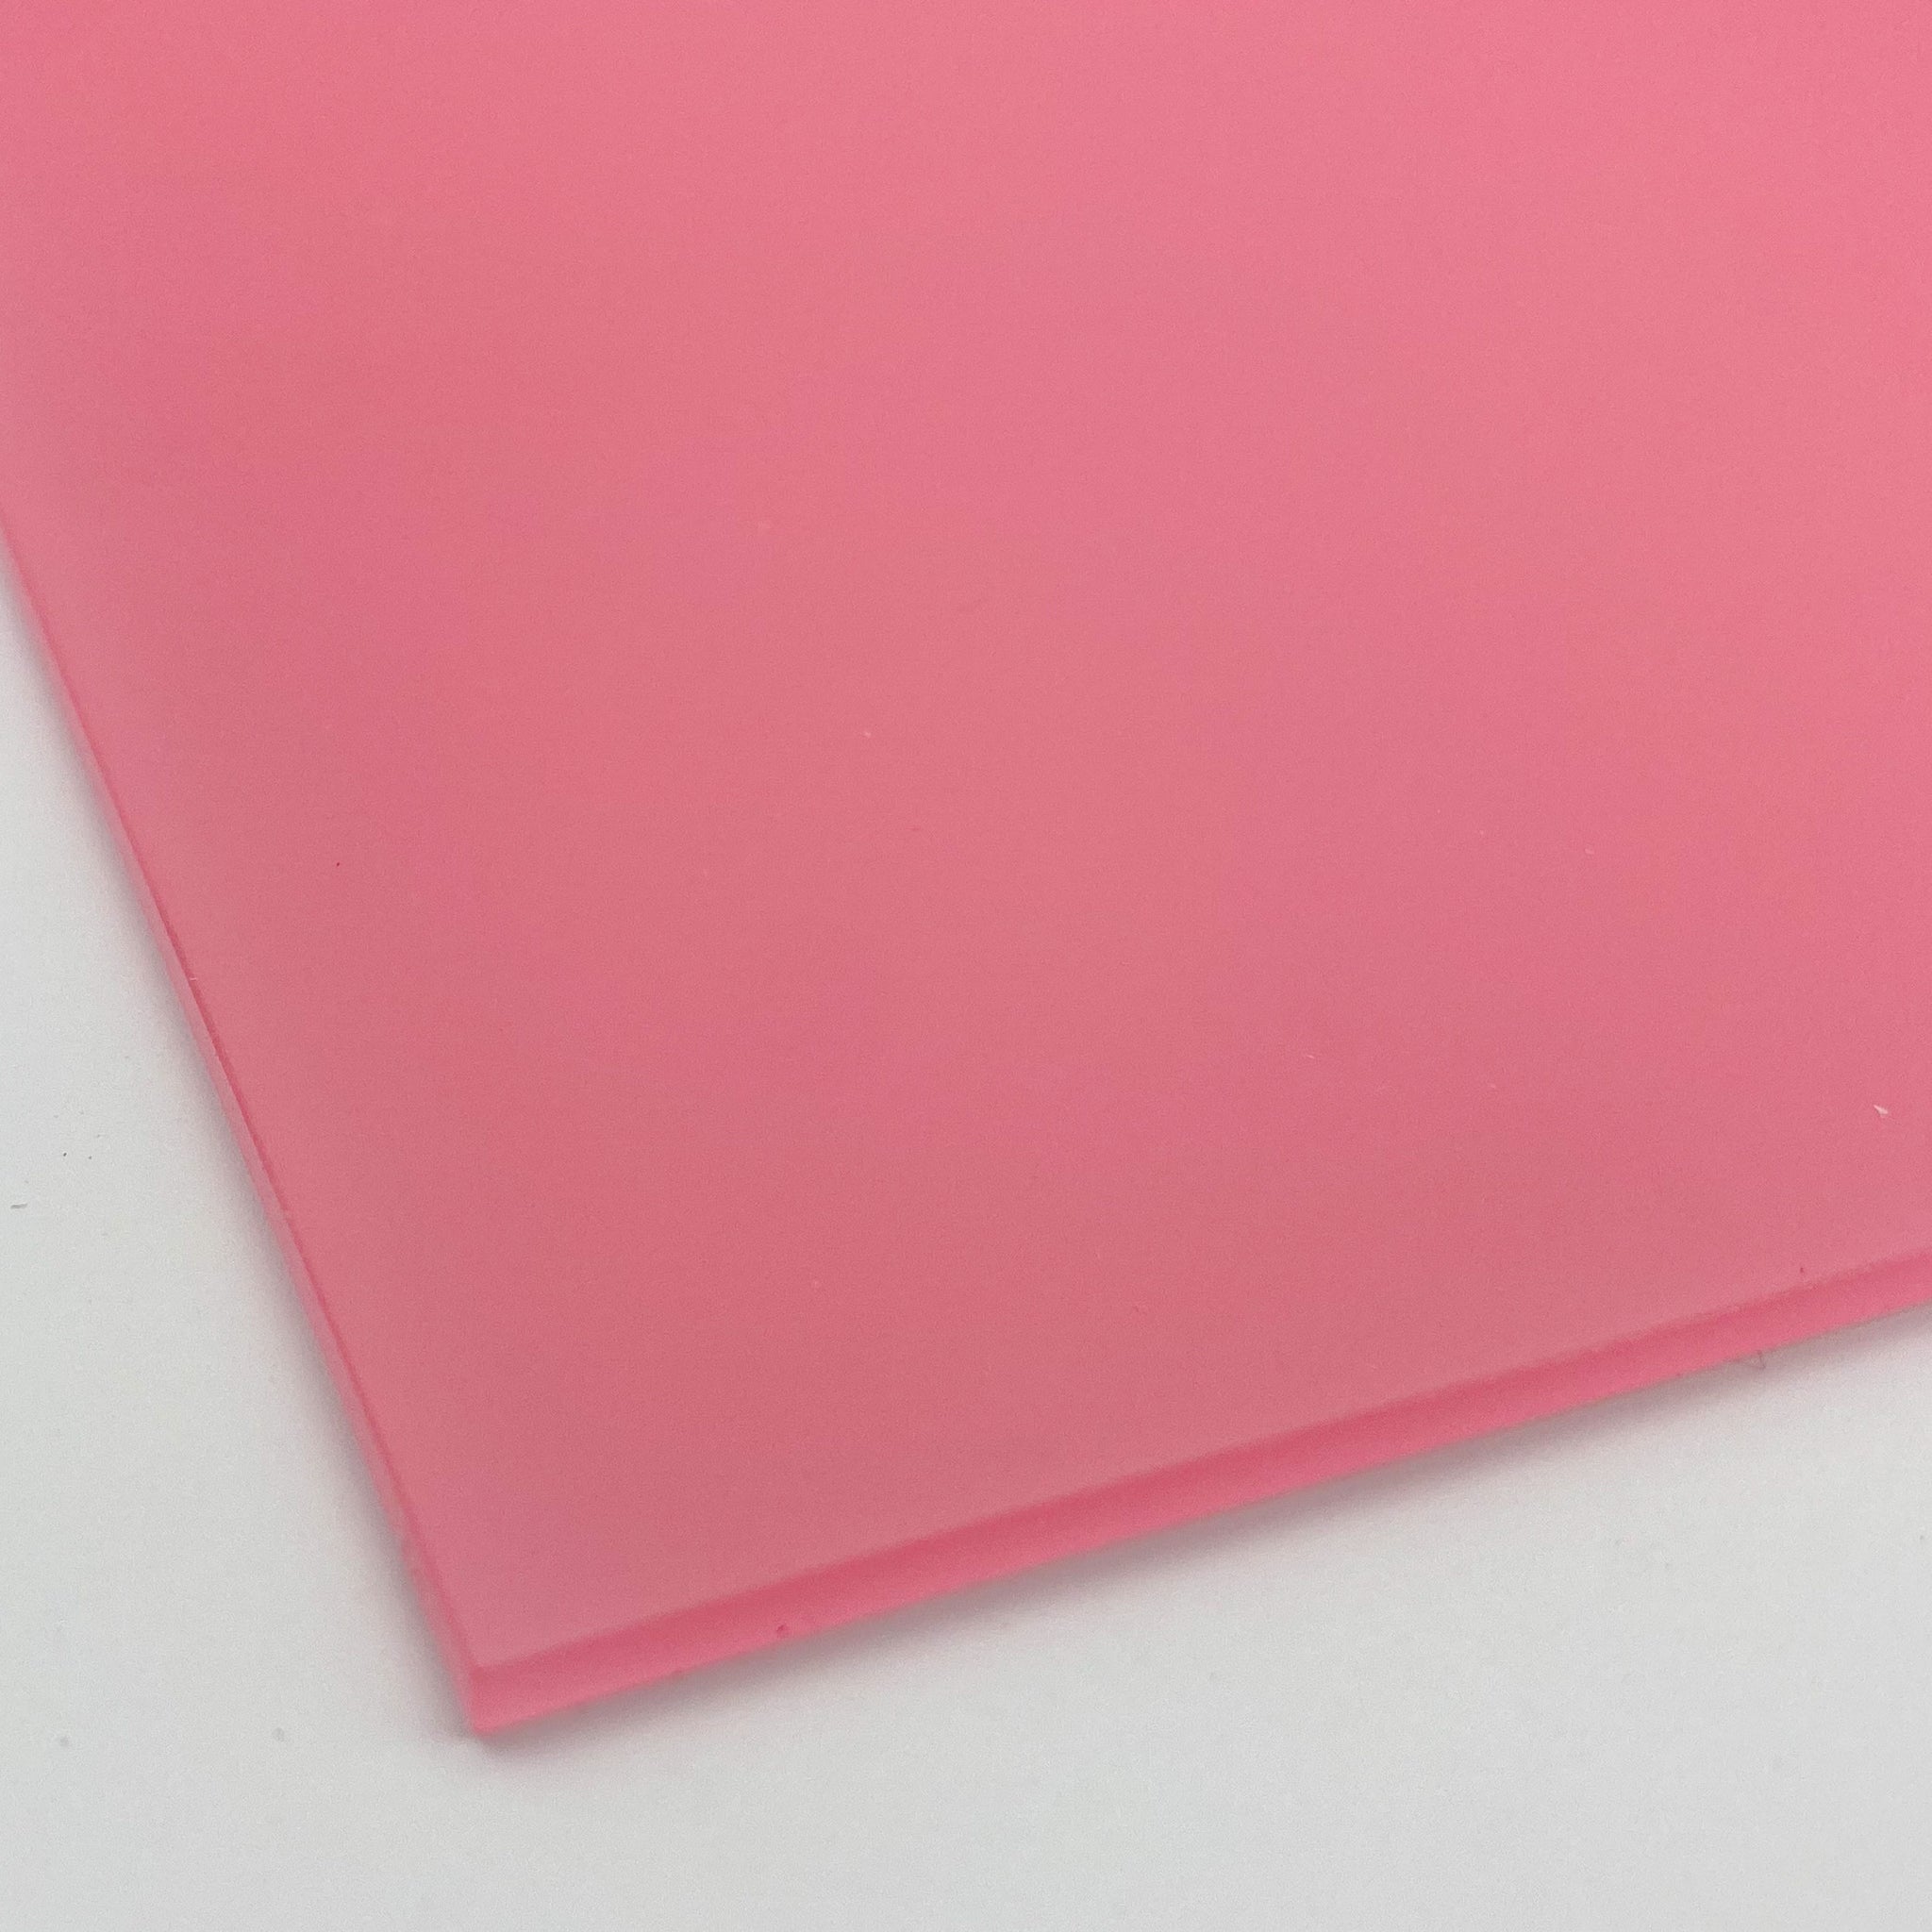 Whole Acrylic Sheet - Pink Translucent 8% - 1/8 inch thick